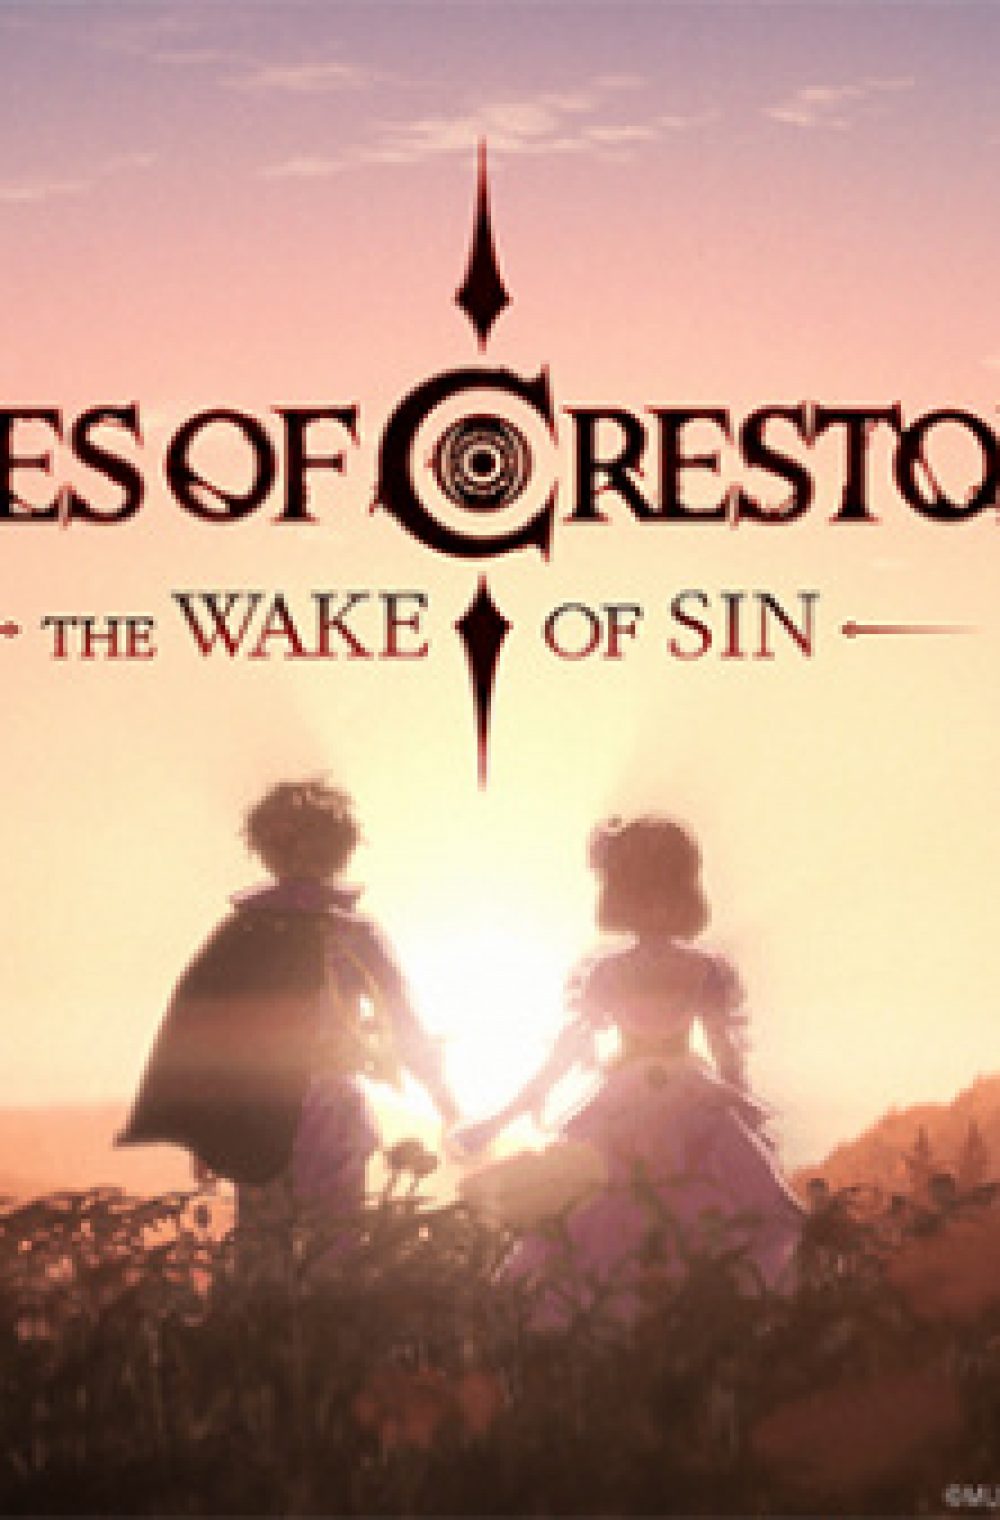 Tales of Crestoria: The Wake of Sin